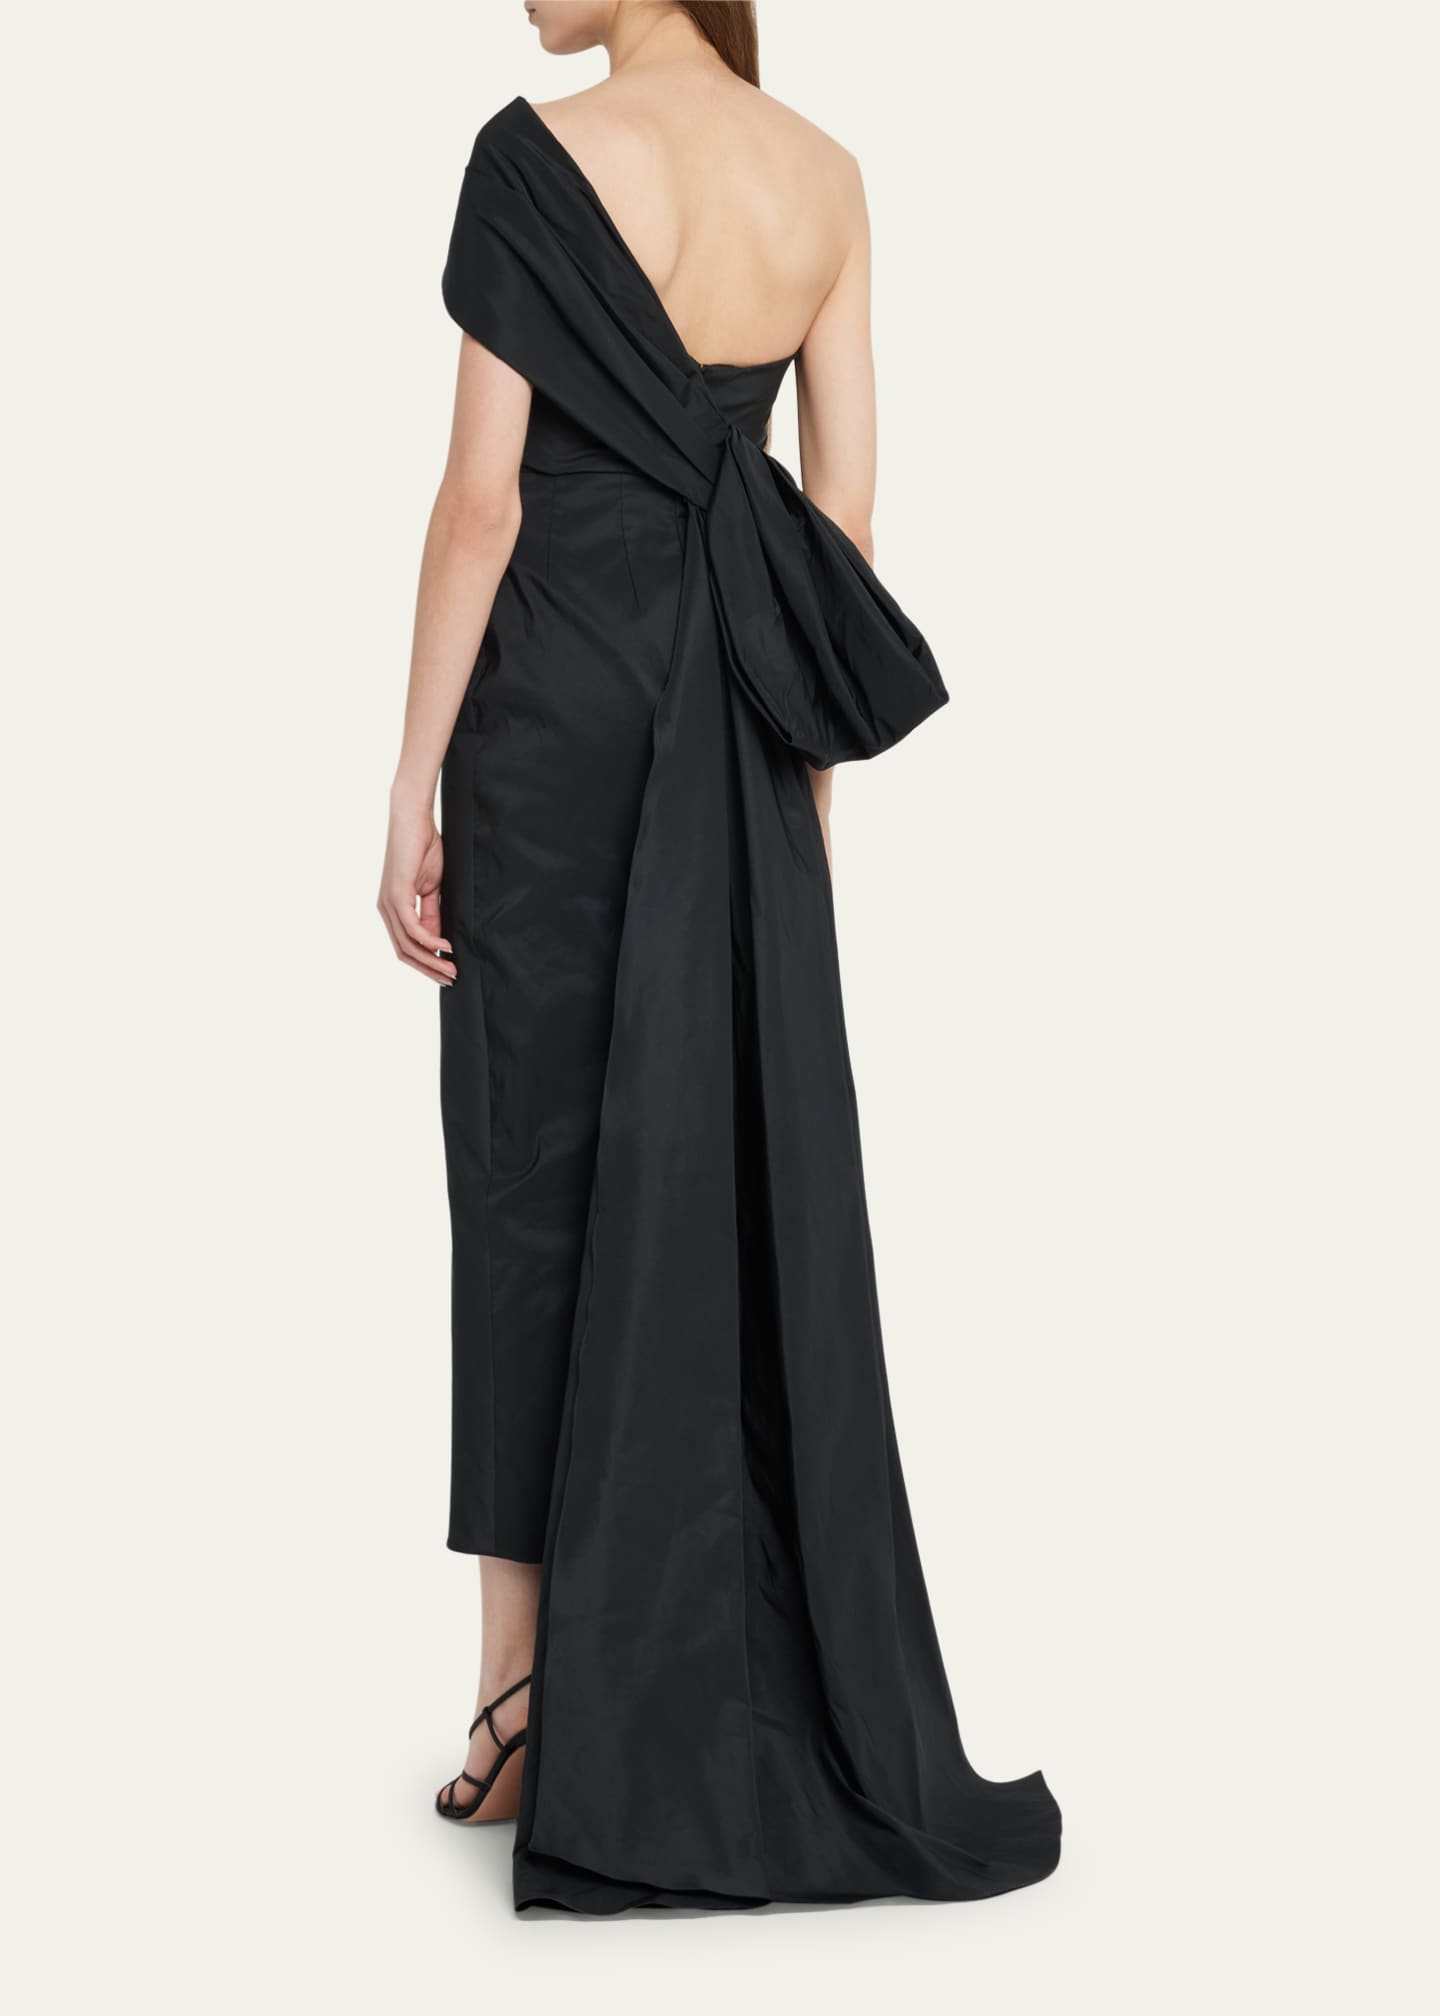 Marchesa One-Shoulder Column Gown with Draped Bow Detail - Bergdorf Goodman